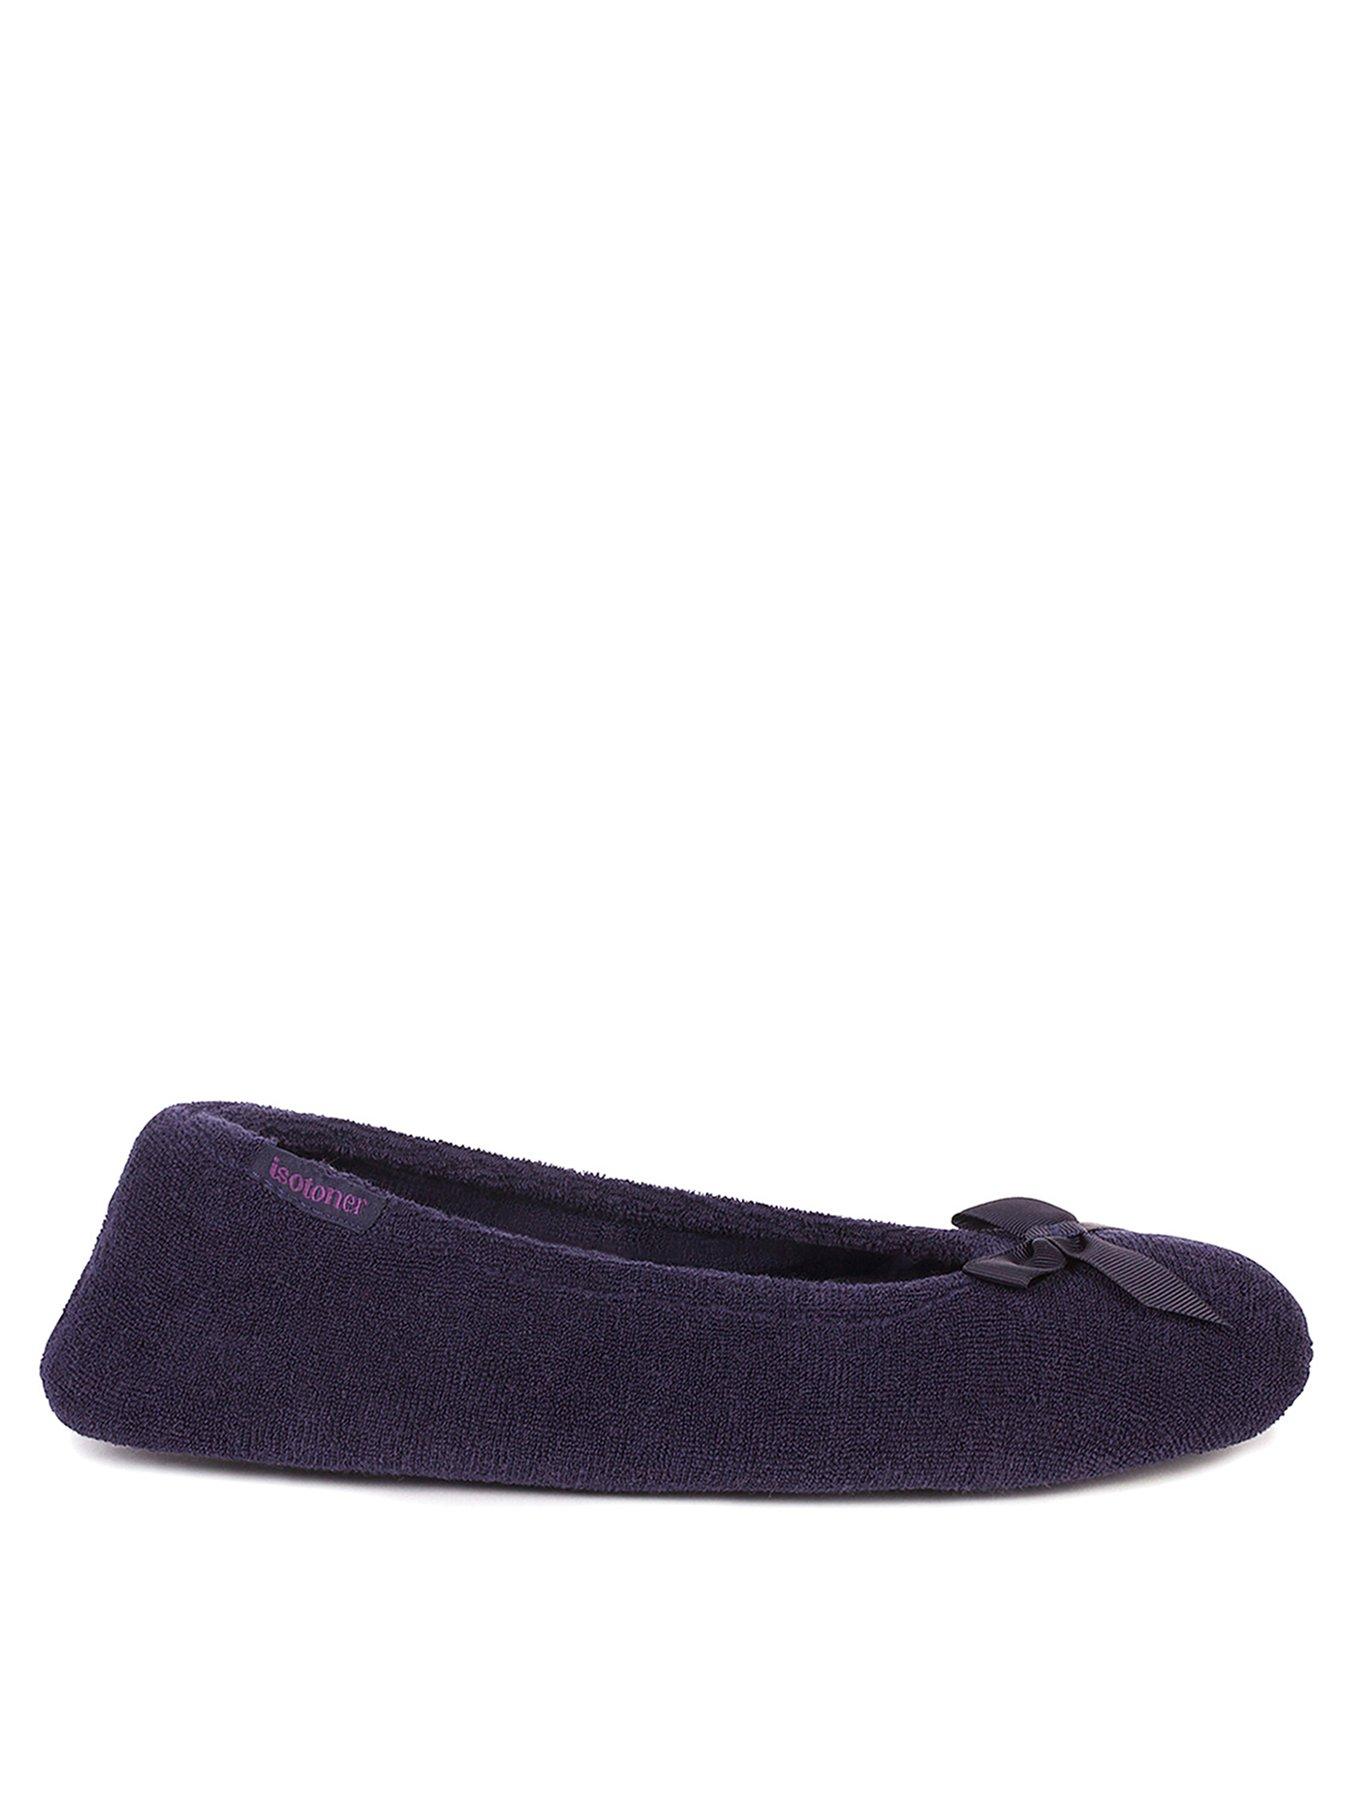 Isotoner Womens Classic Terry Ballerina Slipper NVY-XL, 54% OFF